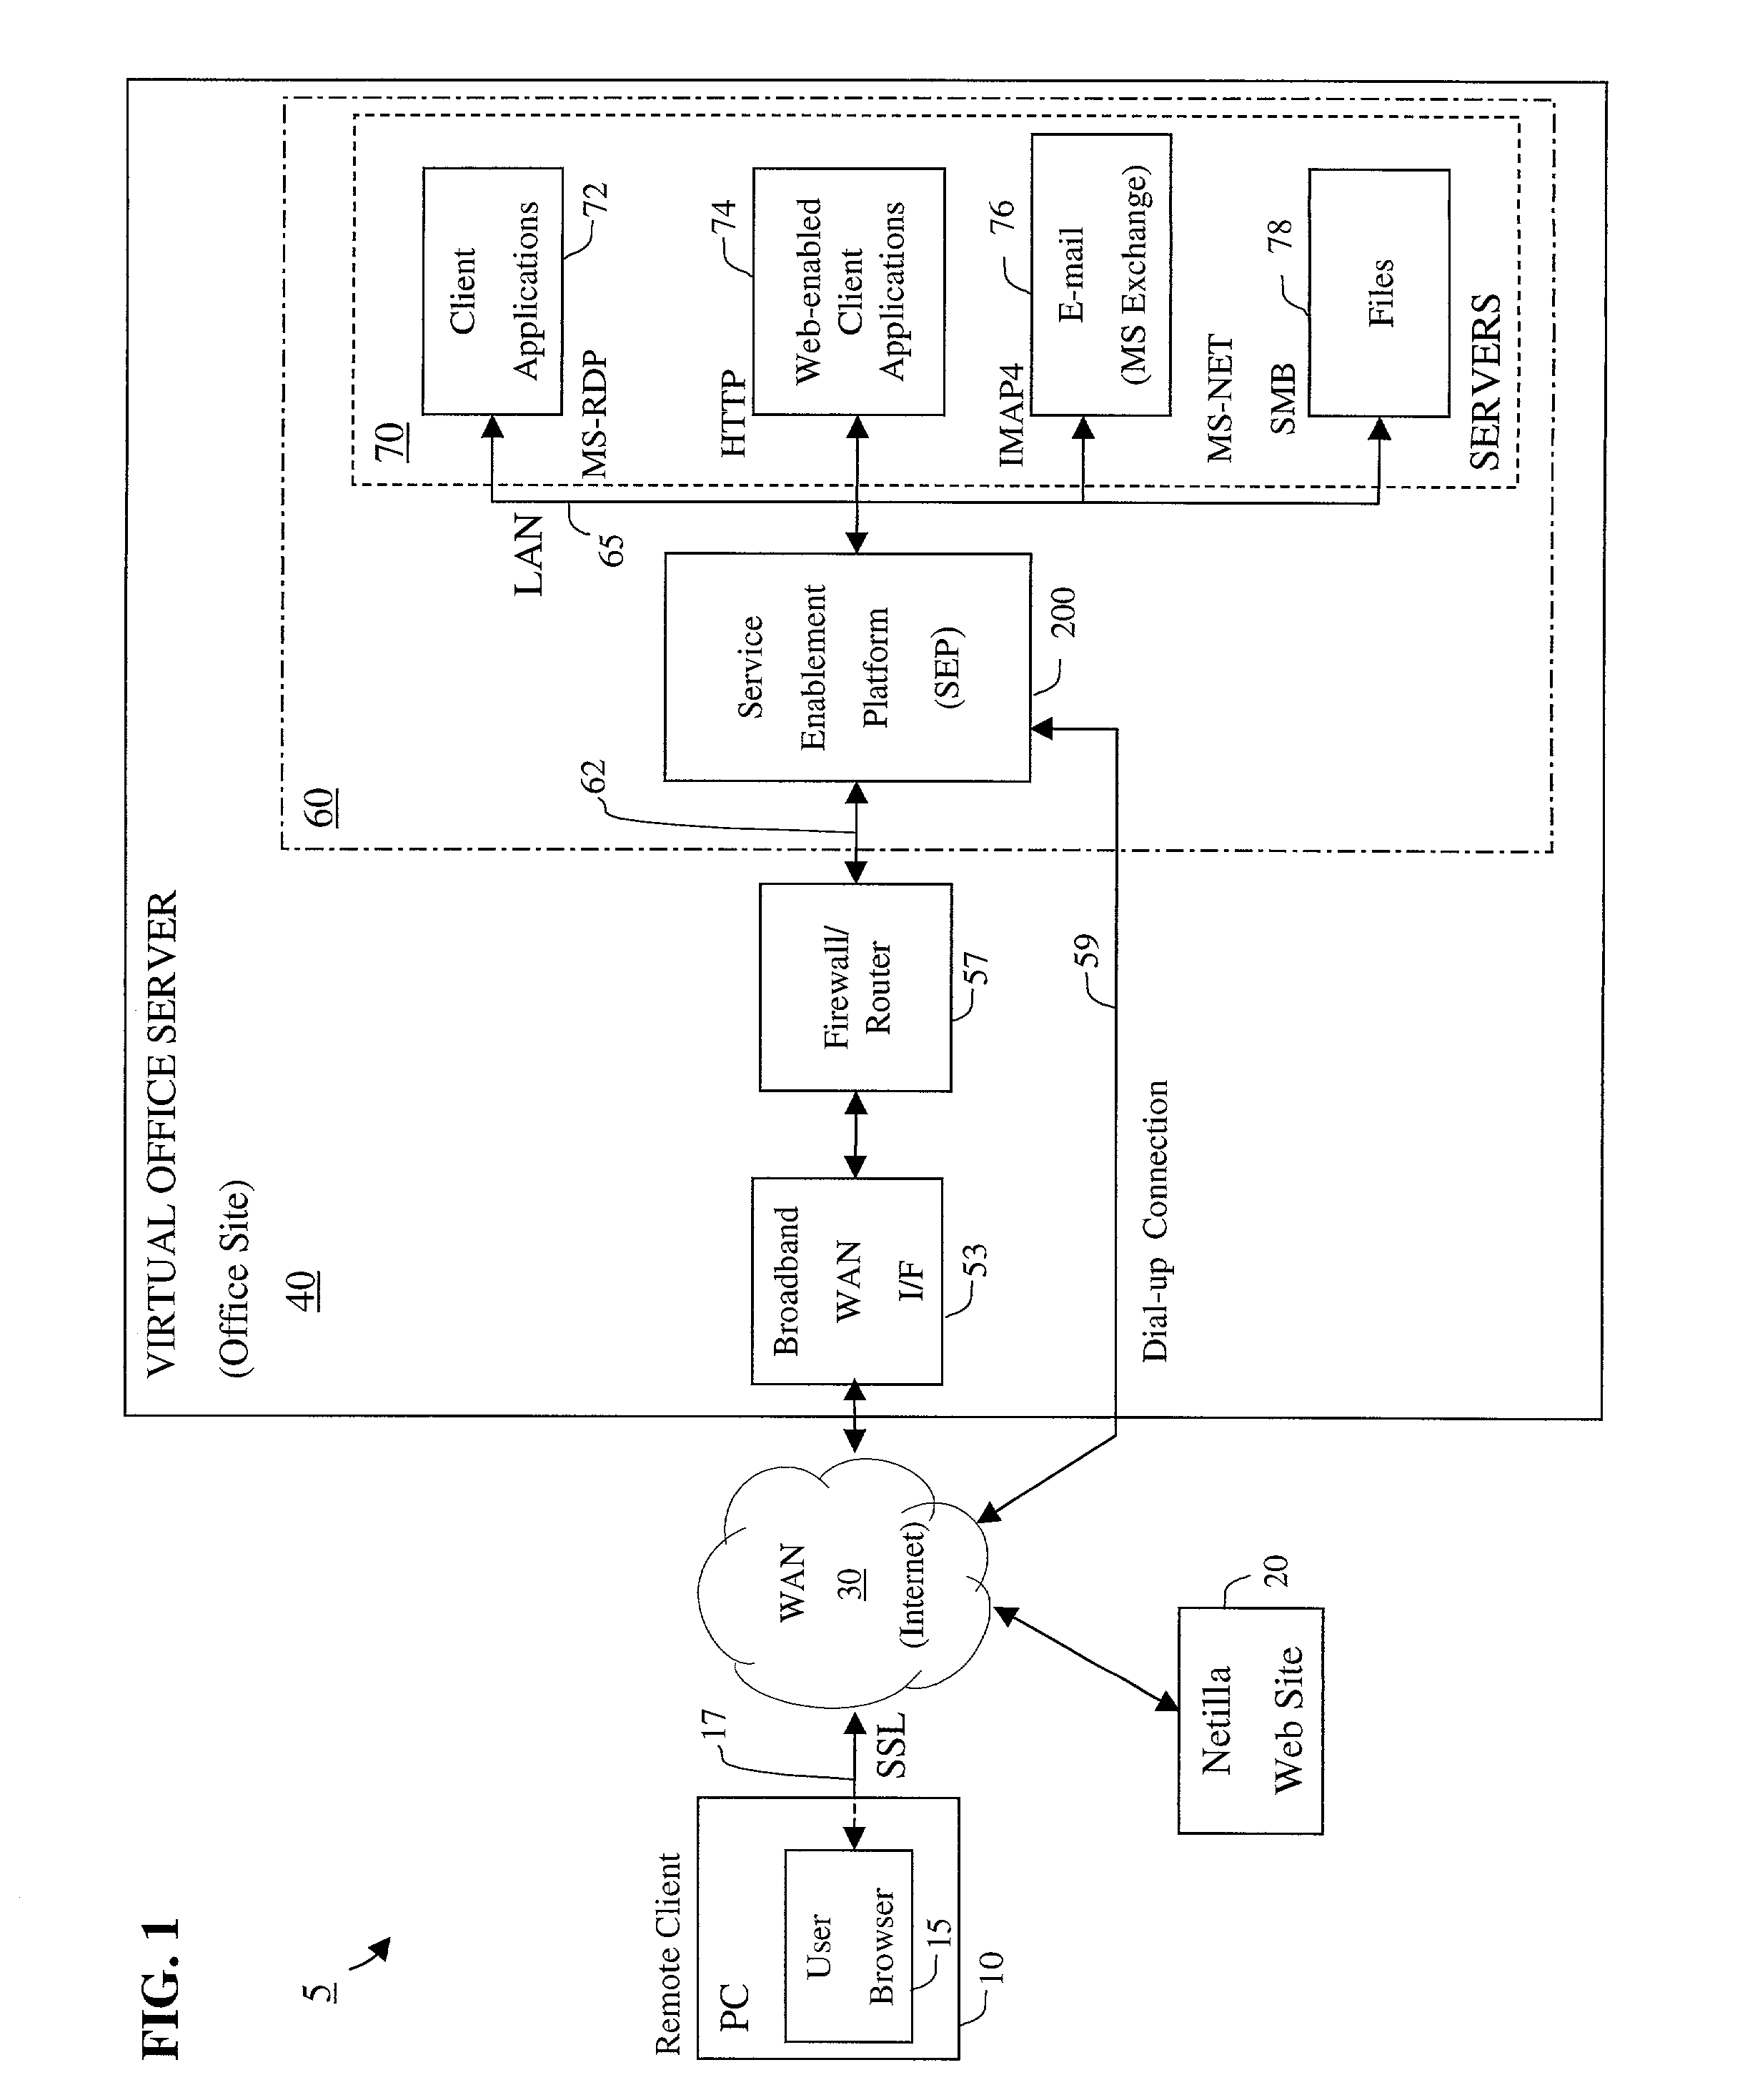 Apparatus and accompanying methods for providing, through a centralized server site, a secure, cost-effective, web-enabled, integrated virtual office environment remotely accessible through a network-connected web browser